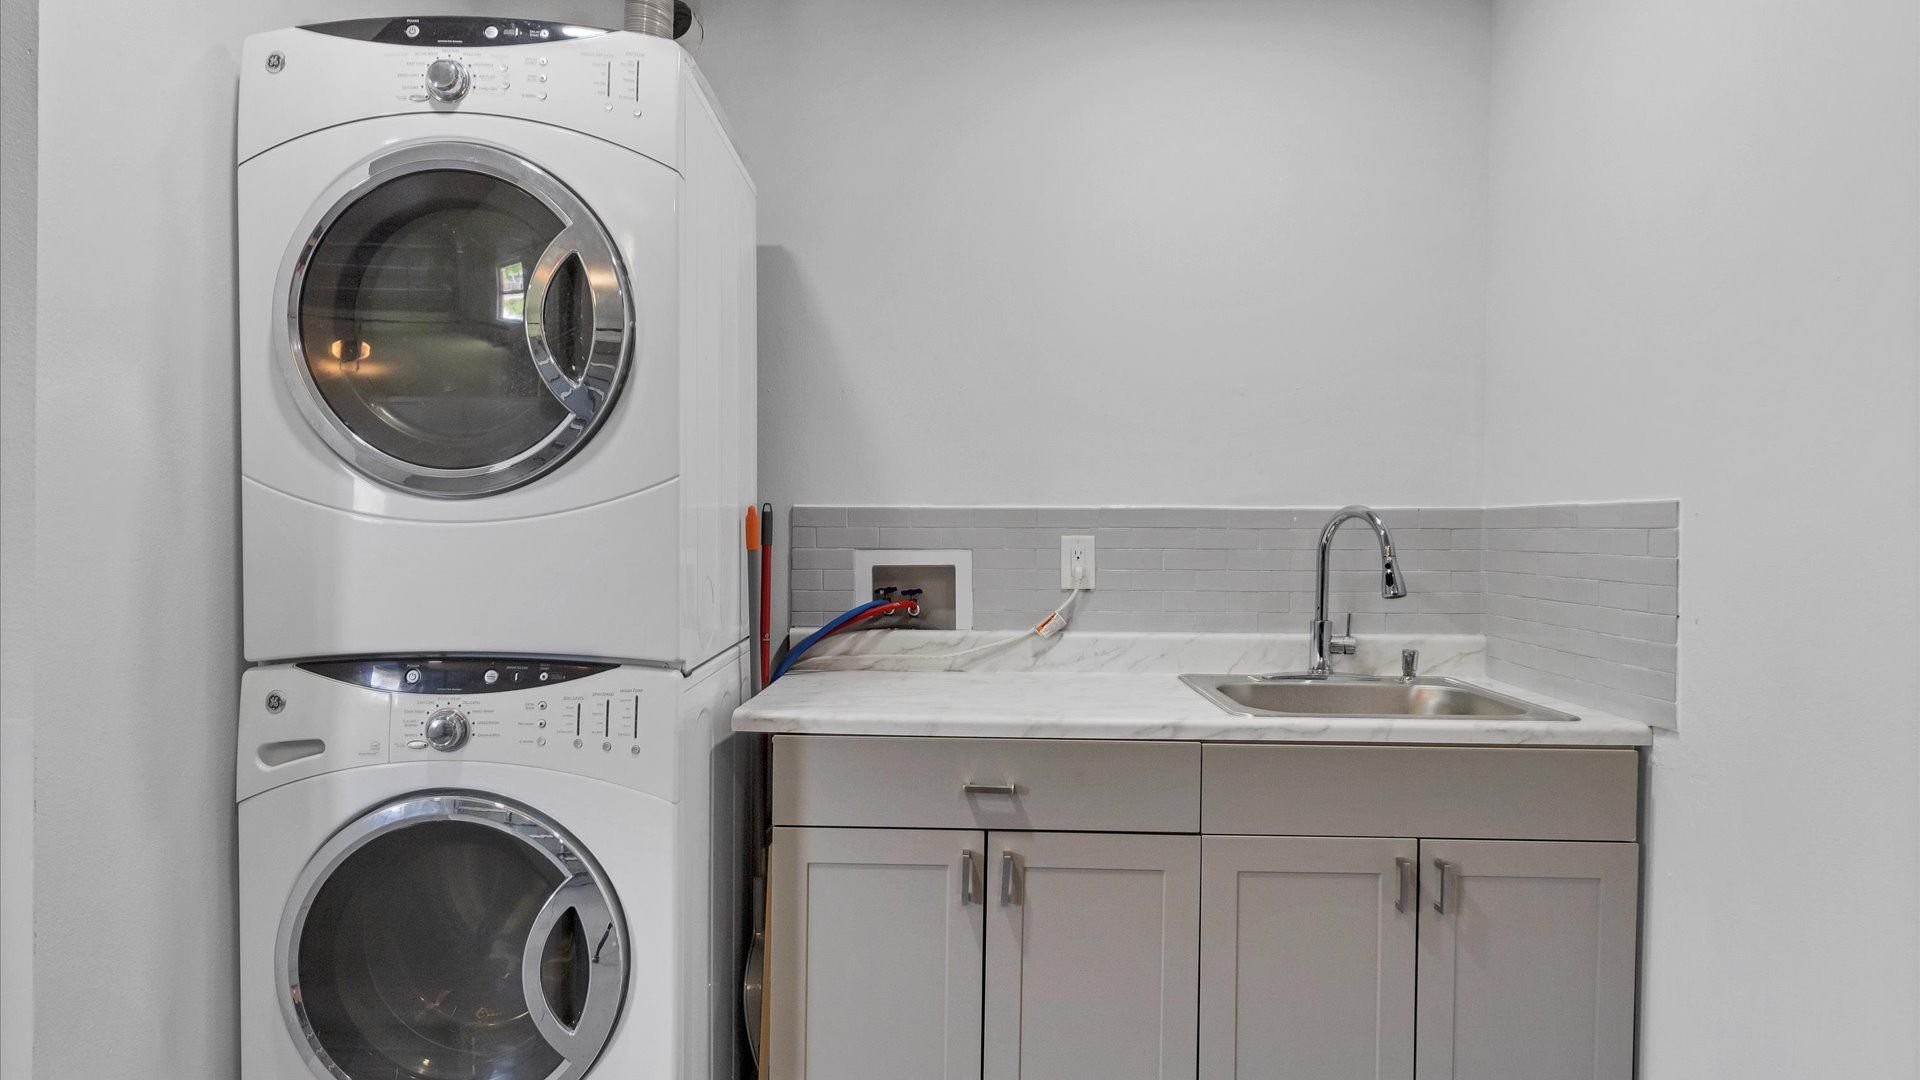 Full size washer and dryer in the garage for guest use